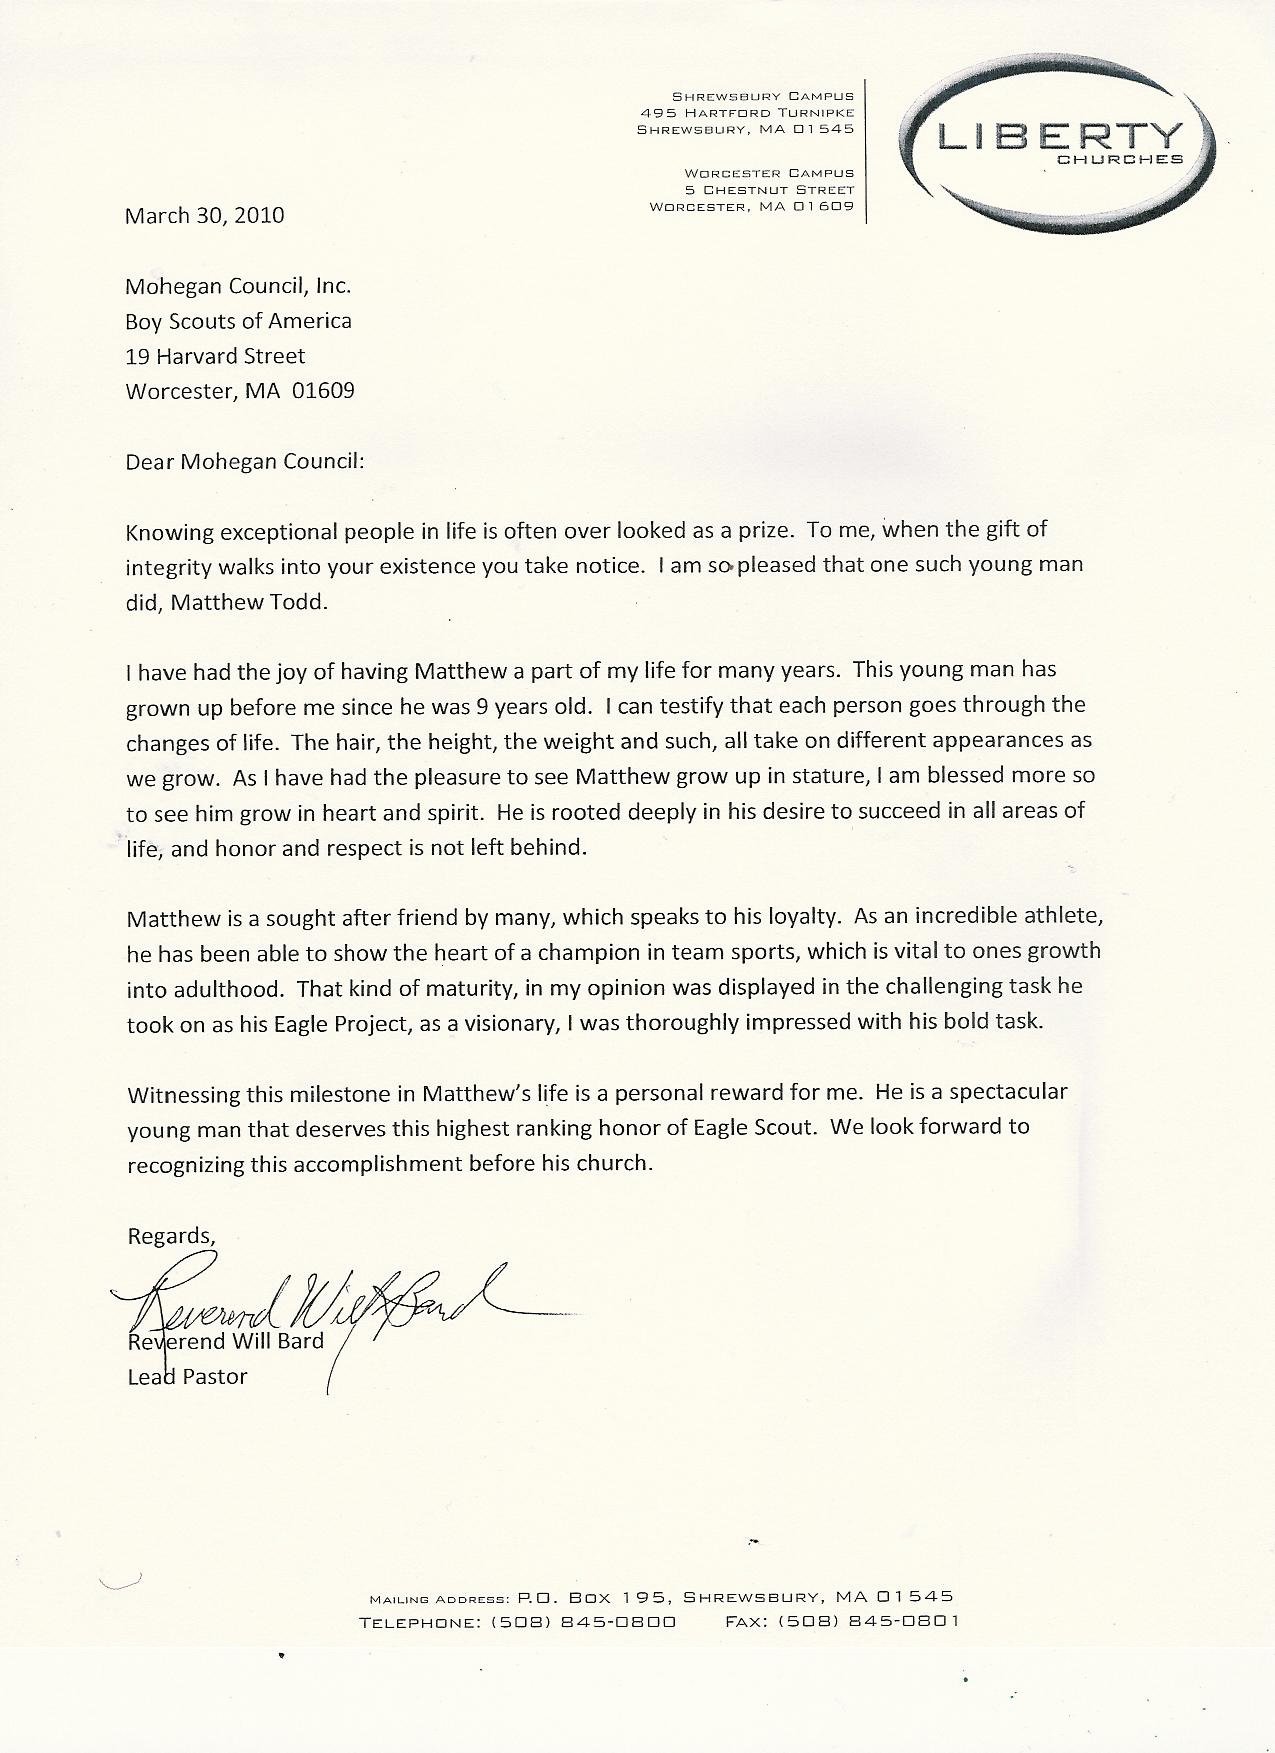 Sample Eagle Scout Recommendation Letter Best Of Information Playground Matthew S Eagle Application and